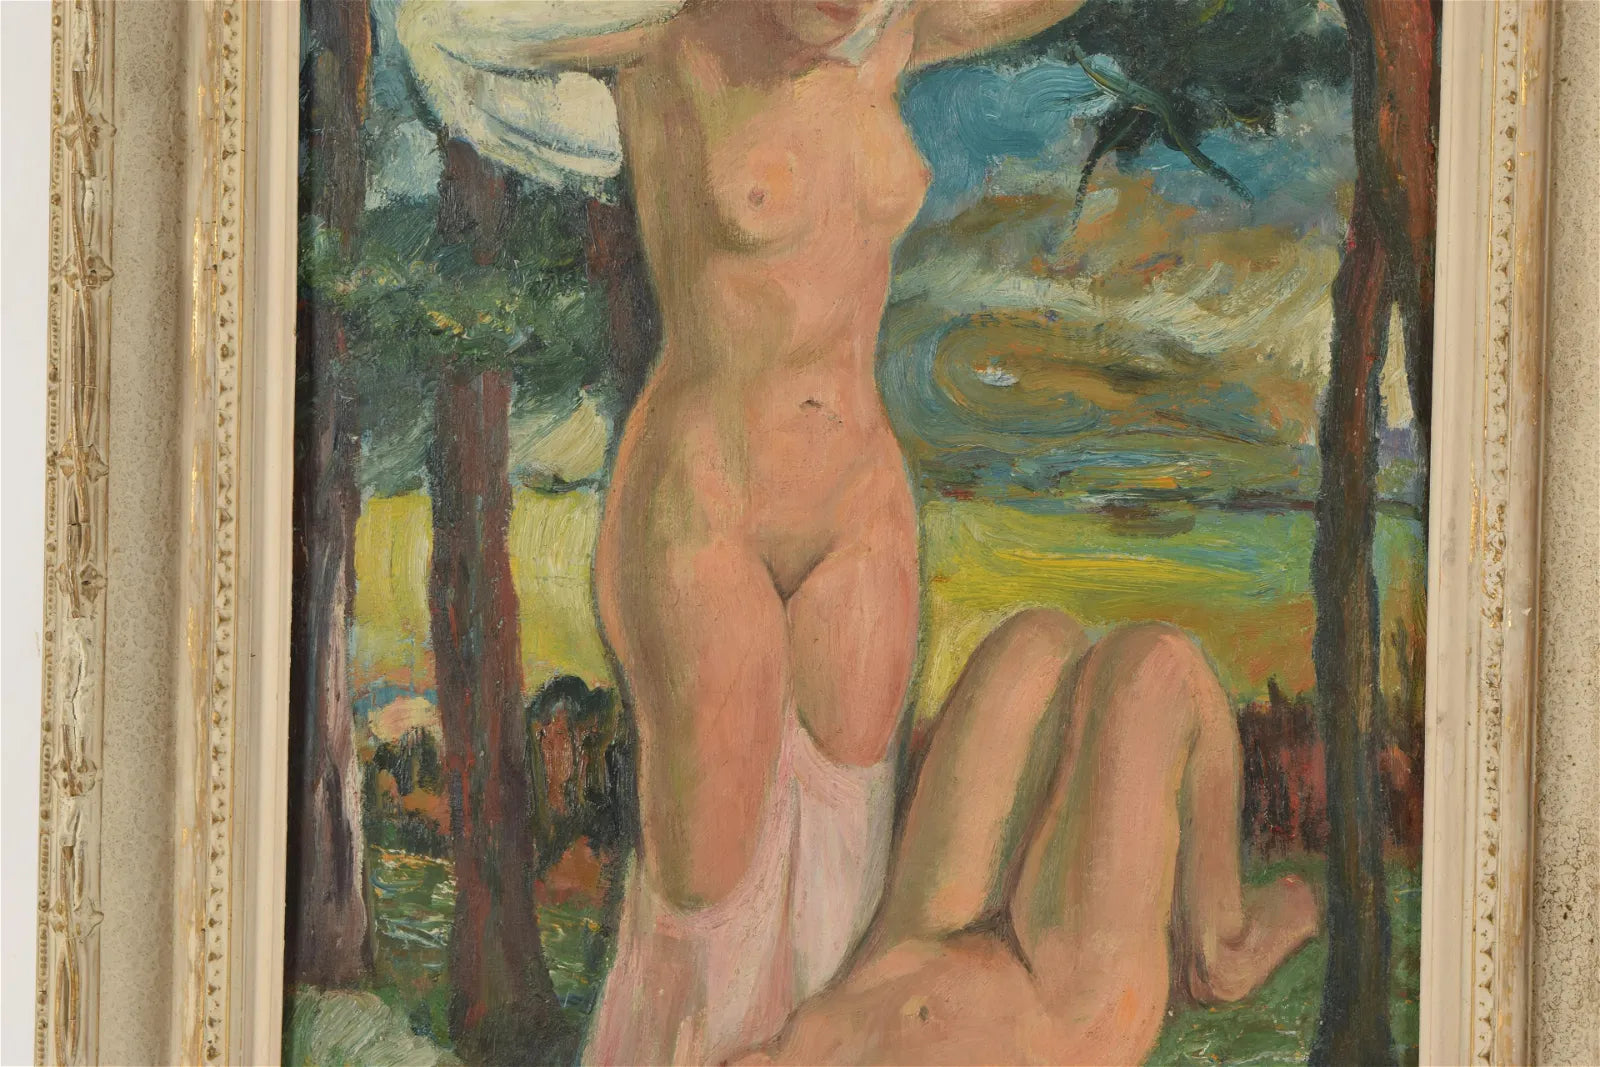 AW588: Early 20th Century Post-Impressionist Painting of Nudes in a Landscape